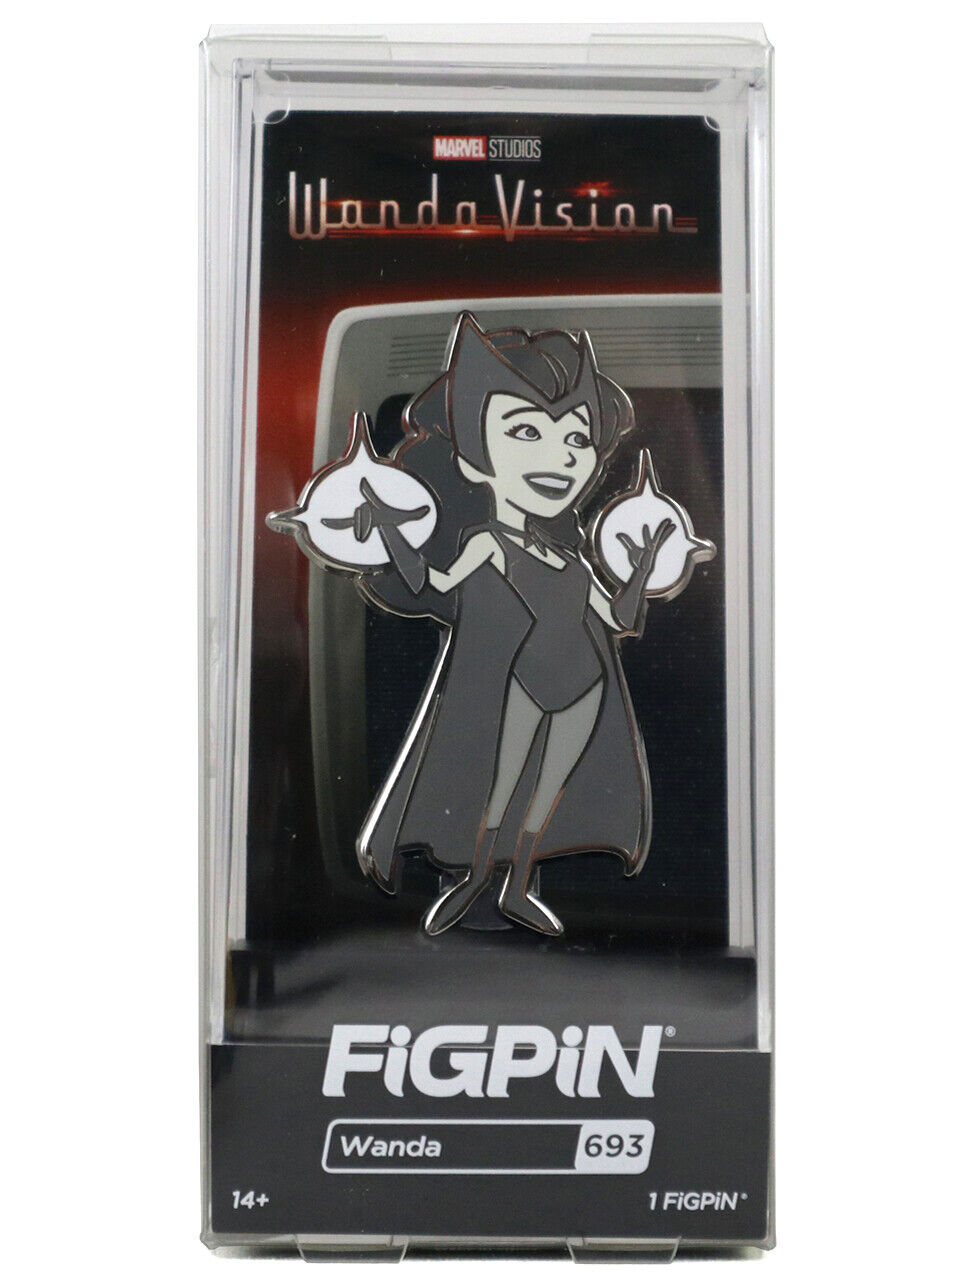 Figpin Wandavision Vision Exclusive Artist Proof #693 Limited Edition 51/85